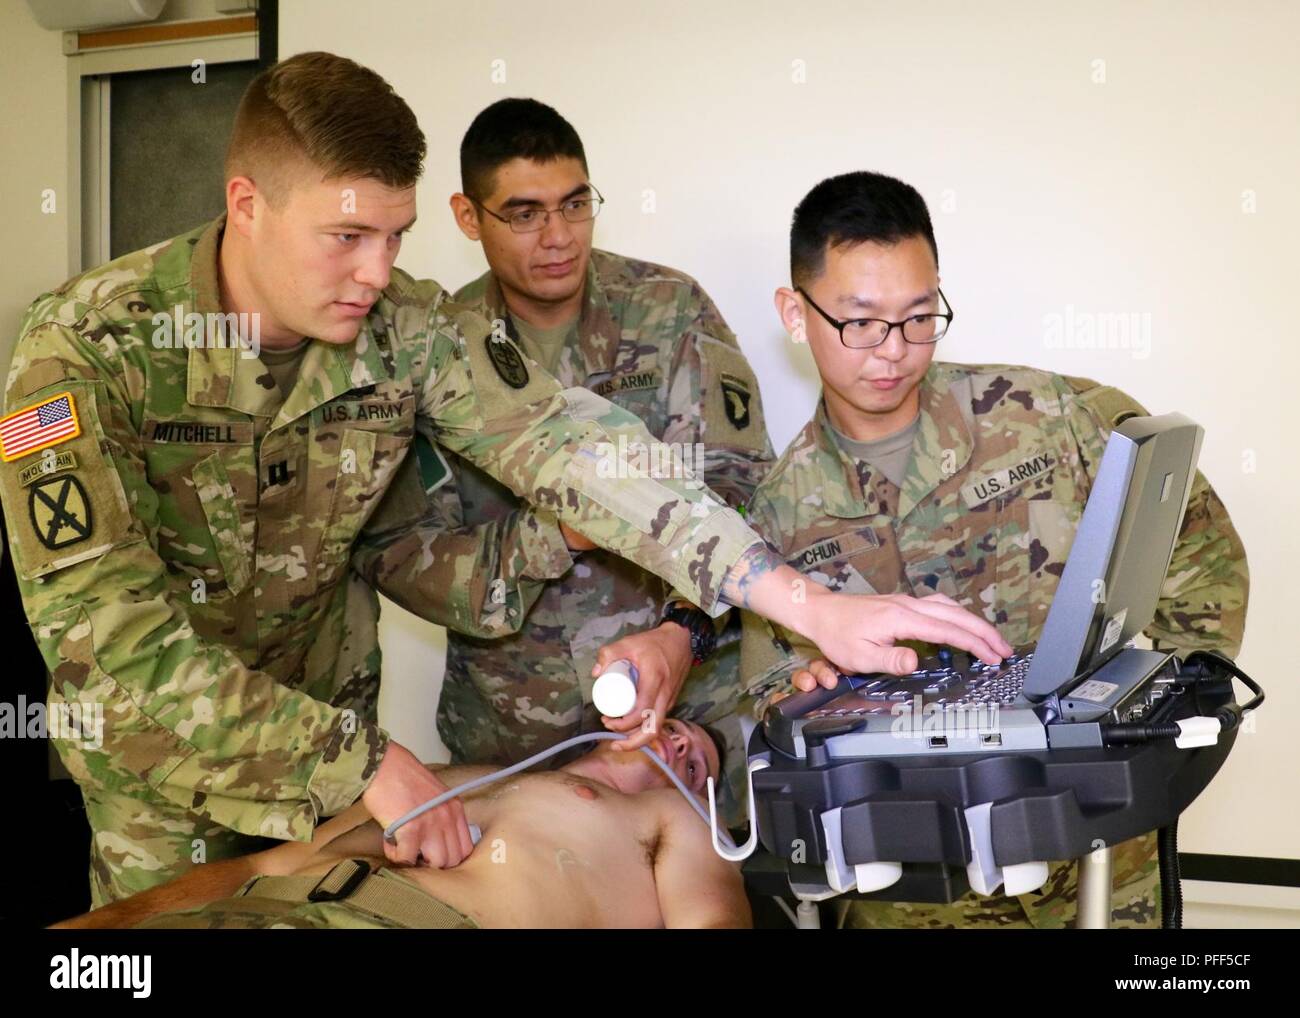 Interservice Physician Assistant Program Phase II student Capt. Dakota Mitchell, assigned to Blanchfield, shows combat medic specialist, Spc. Joshua Huante, assigned to 1st Battalion, 187th Infantry Regiment, 3rd Brigade Combat Team, 101st Airborne Division, and patient administration specialist, Spc. Wooyoung Chun, assigned to 626th Brigade Support Battalion, 3rd Brigade Combat Team, 101st Airborne Division how to operate an ultrasound machine on fellow IPAP Phase II student Capt. Zachary Quigg. IPAP Phase II students are assigned to Blanchfield for 13 months to complete clinical rotations. T Stock Photo